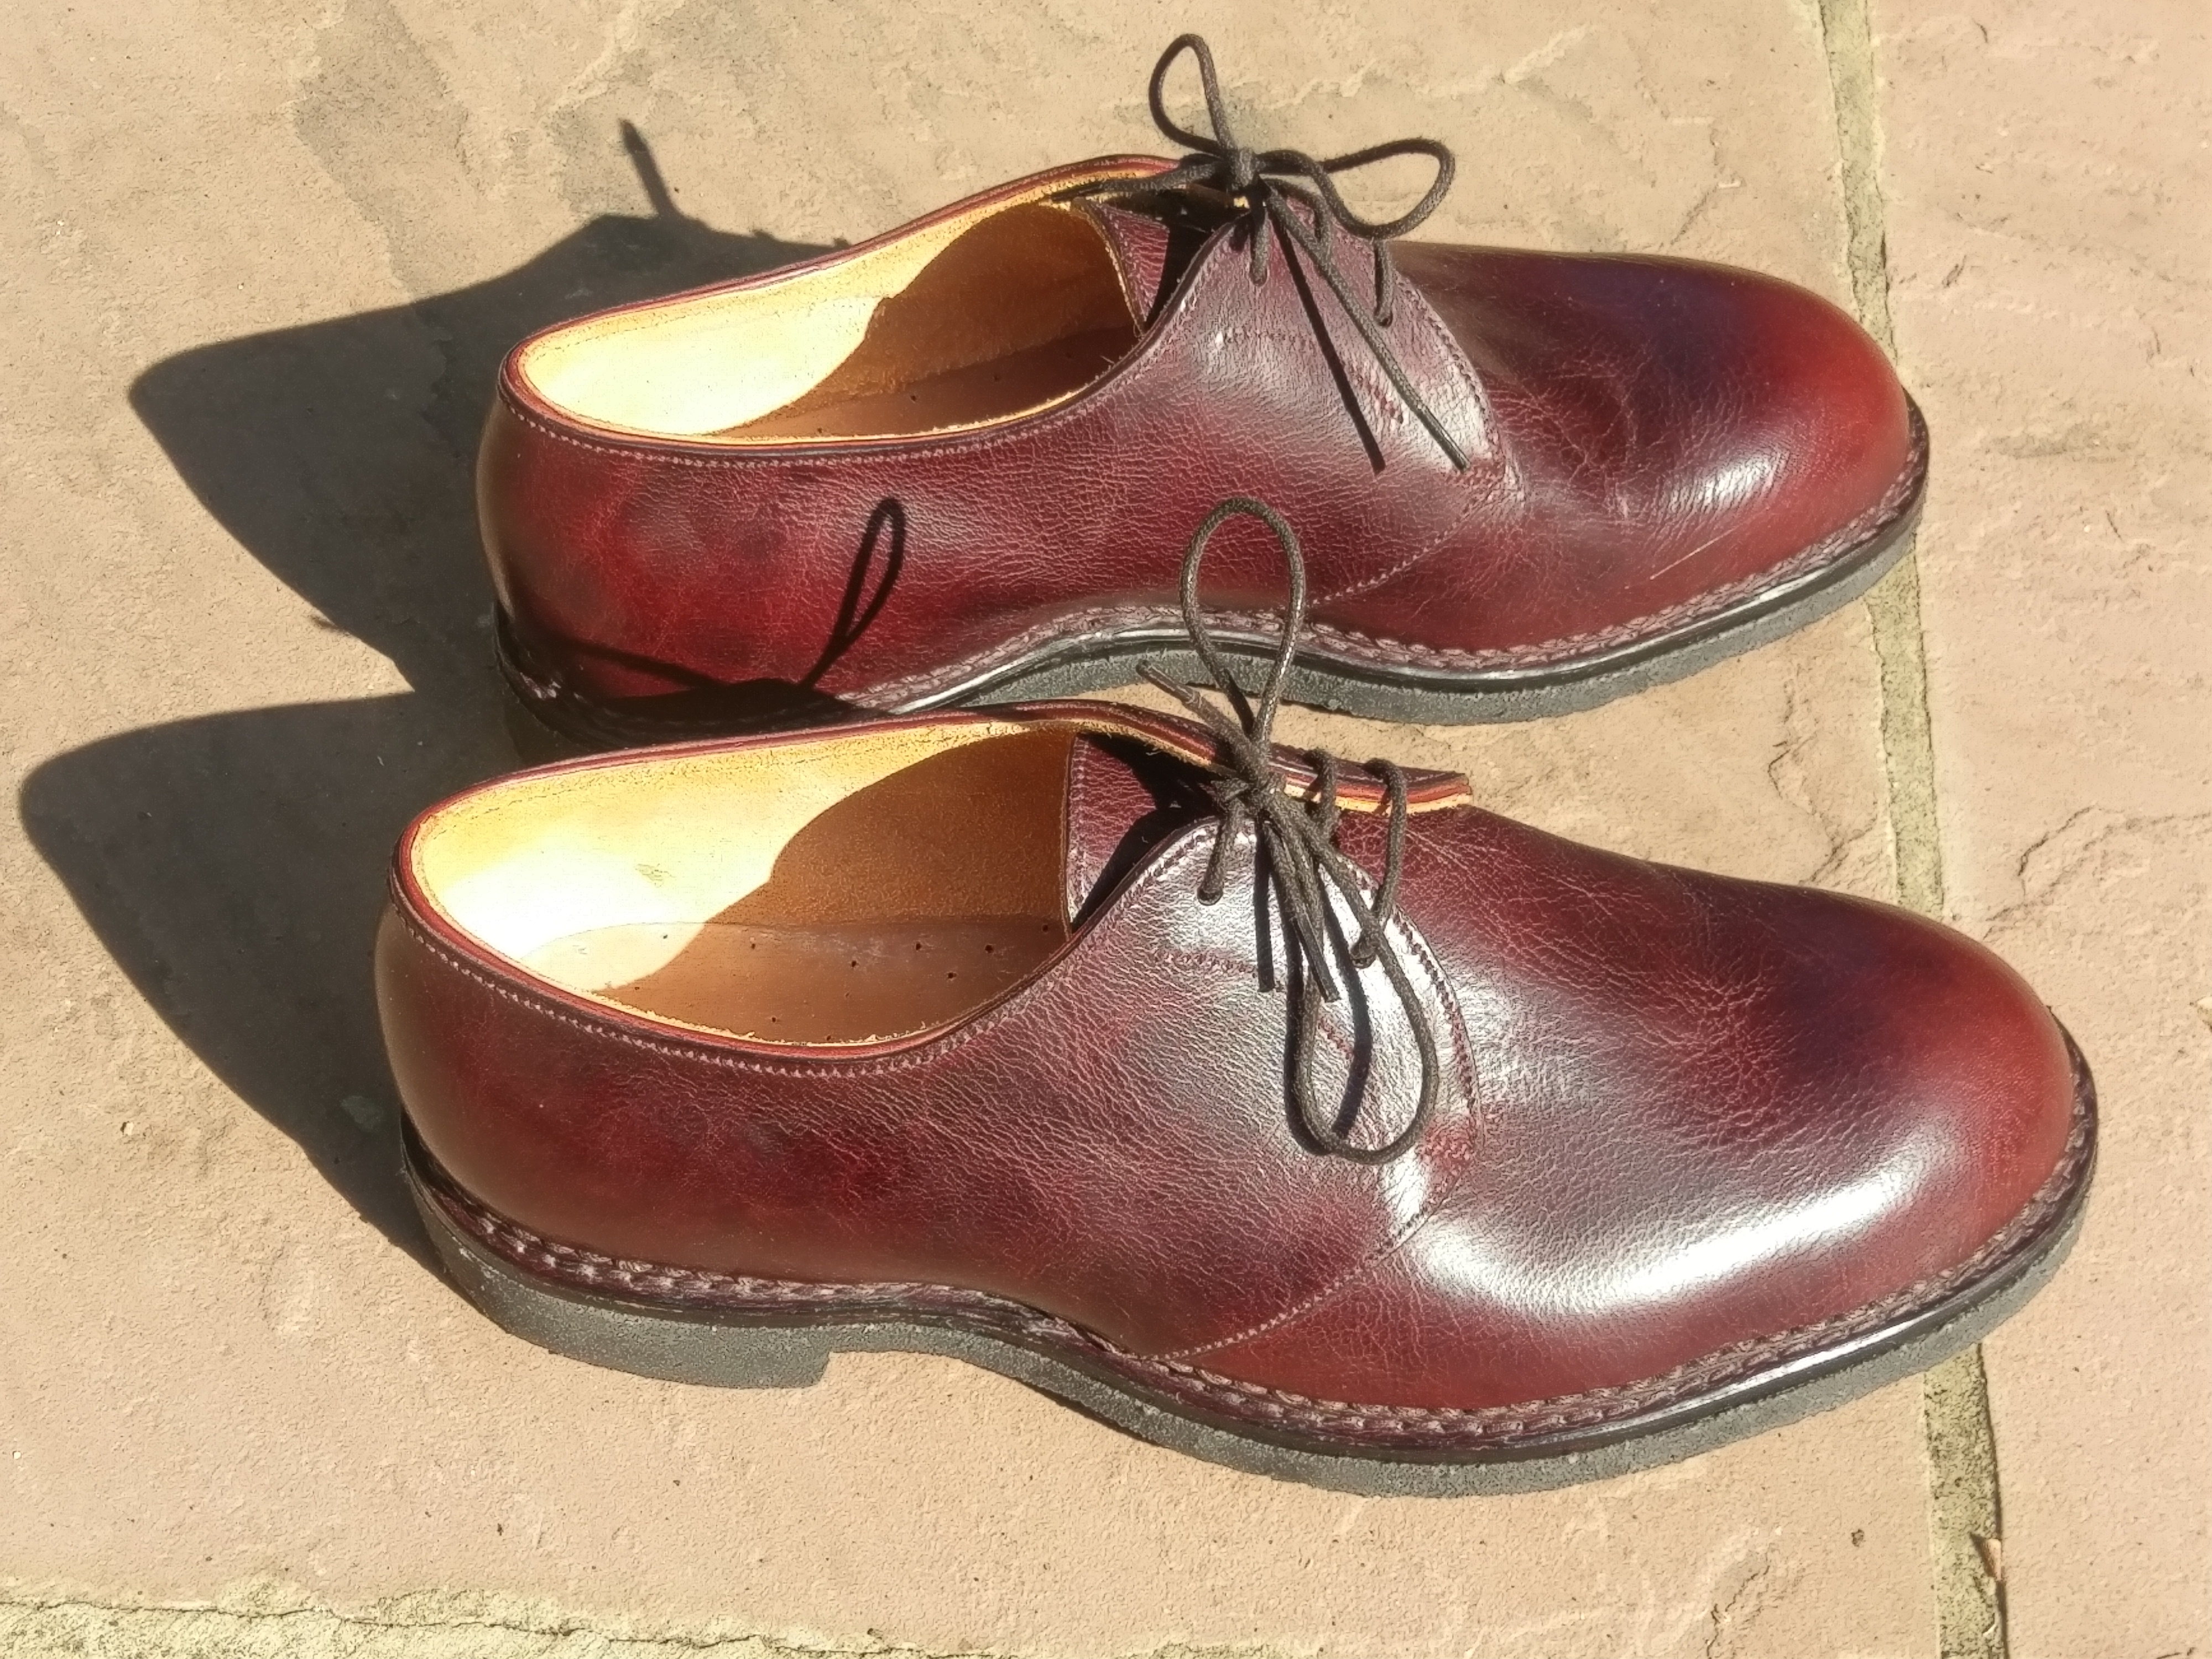 Gents Derbies, with Norwegian Welt and crepe sole, in Badalassi Carlo Wax - Tabacco - made by Philip Bishop